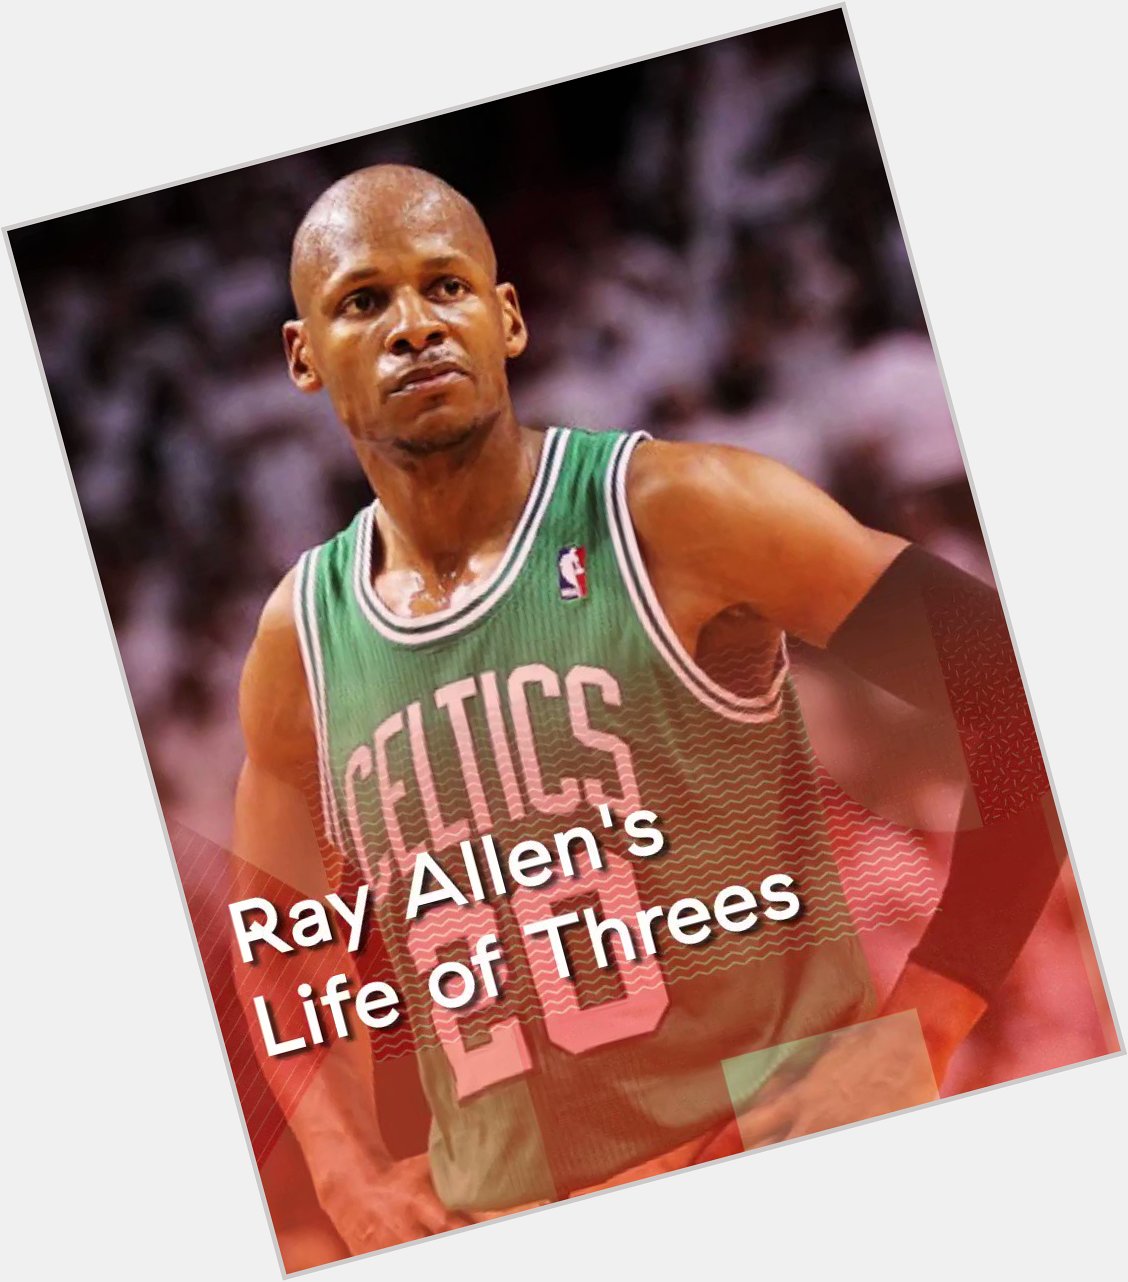 2x NBA champion. Most 3-pointers ever.
Happy birthday to the GOAT shooter: Ray Allen. 